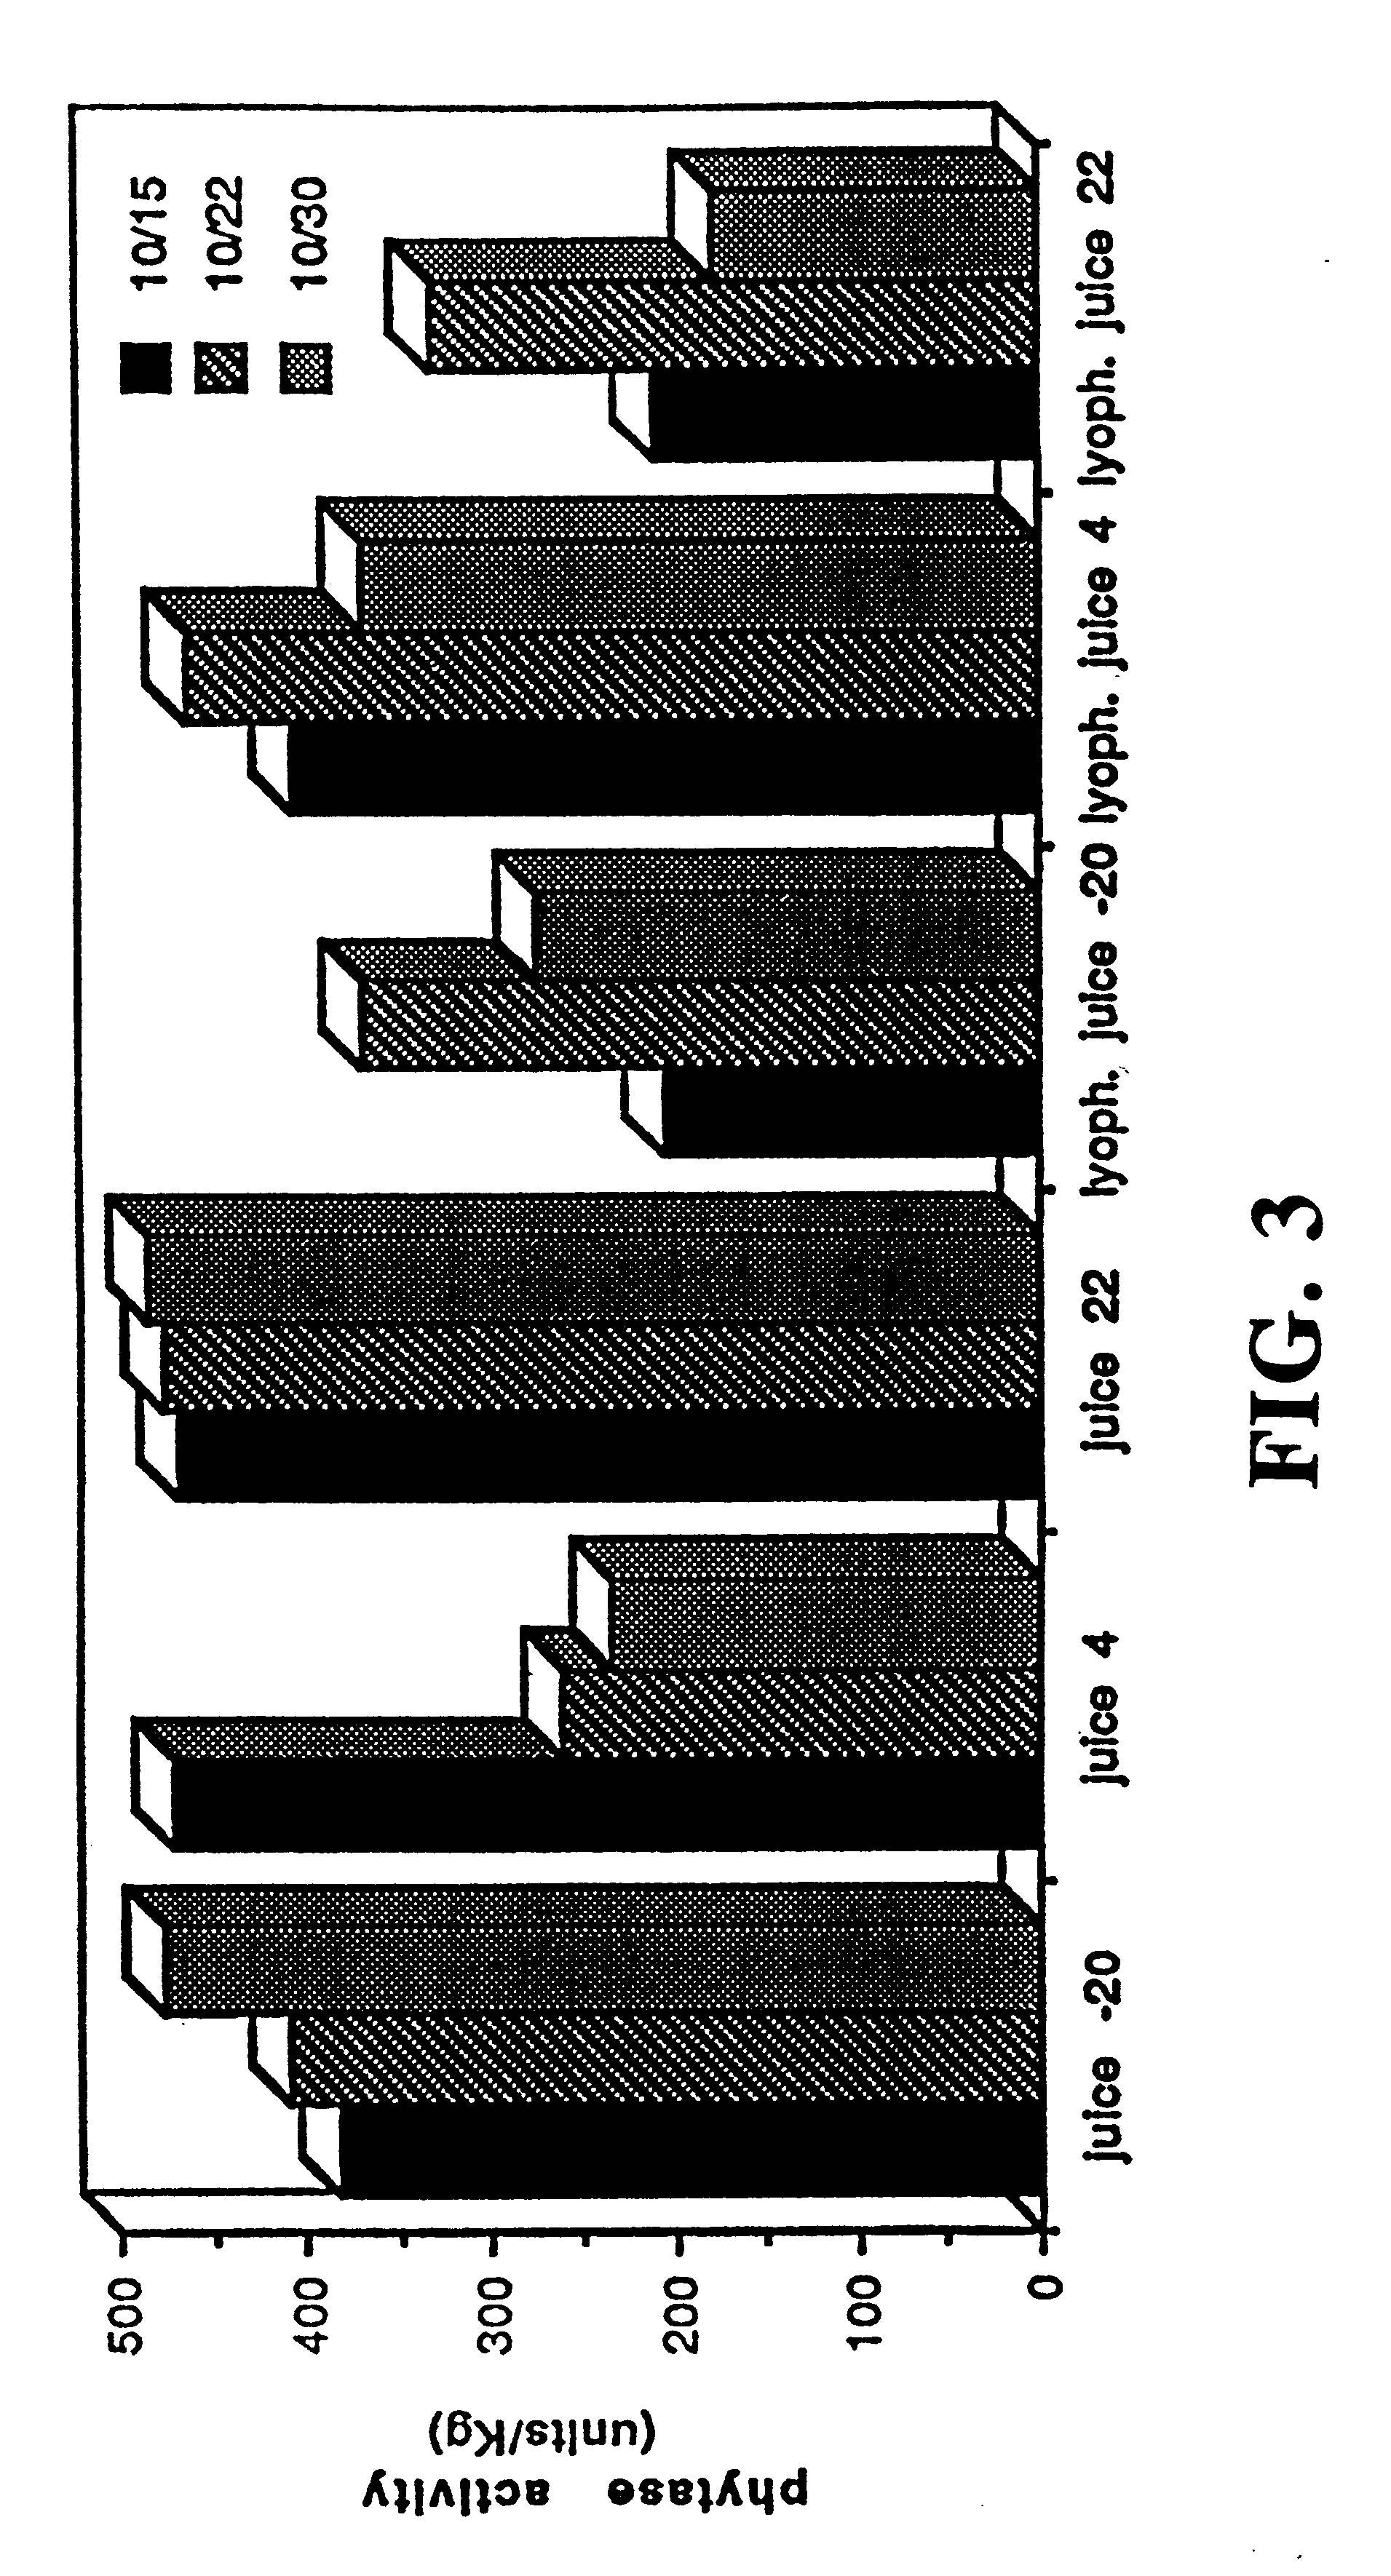 Animal feed compositions containing phytase derived from transgenic alfalfa and methods of use thereof